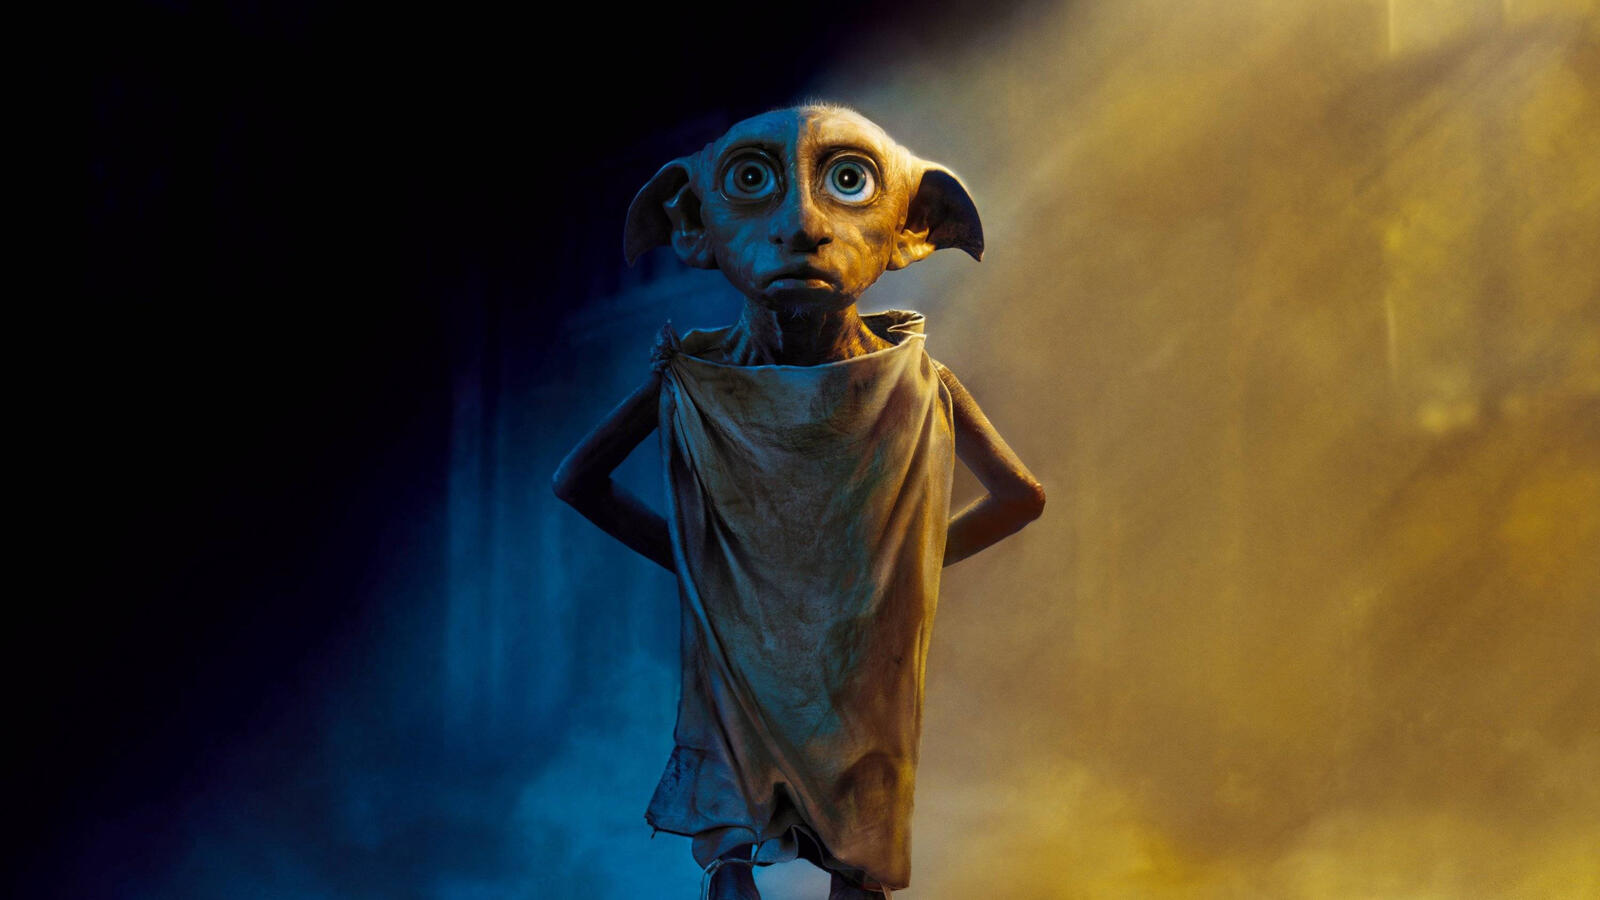 Wallpapers dobby the house elf creature Harry Potter on the desktop